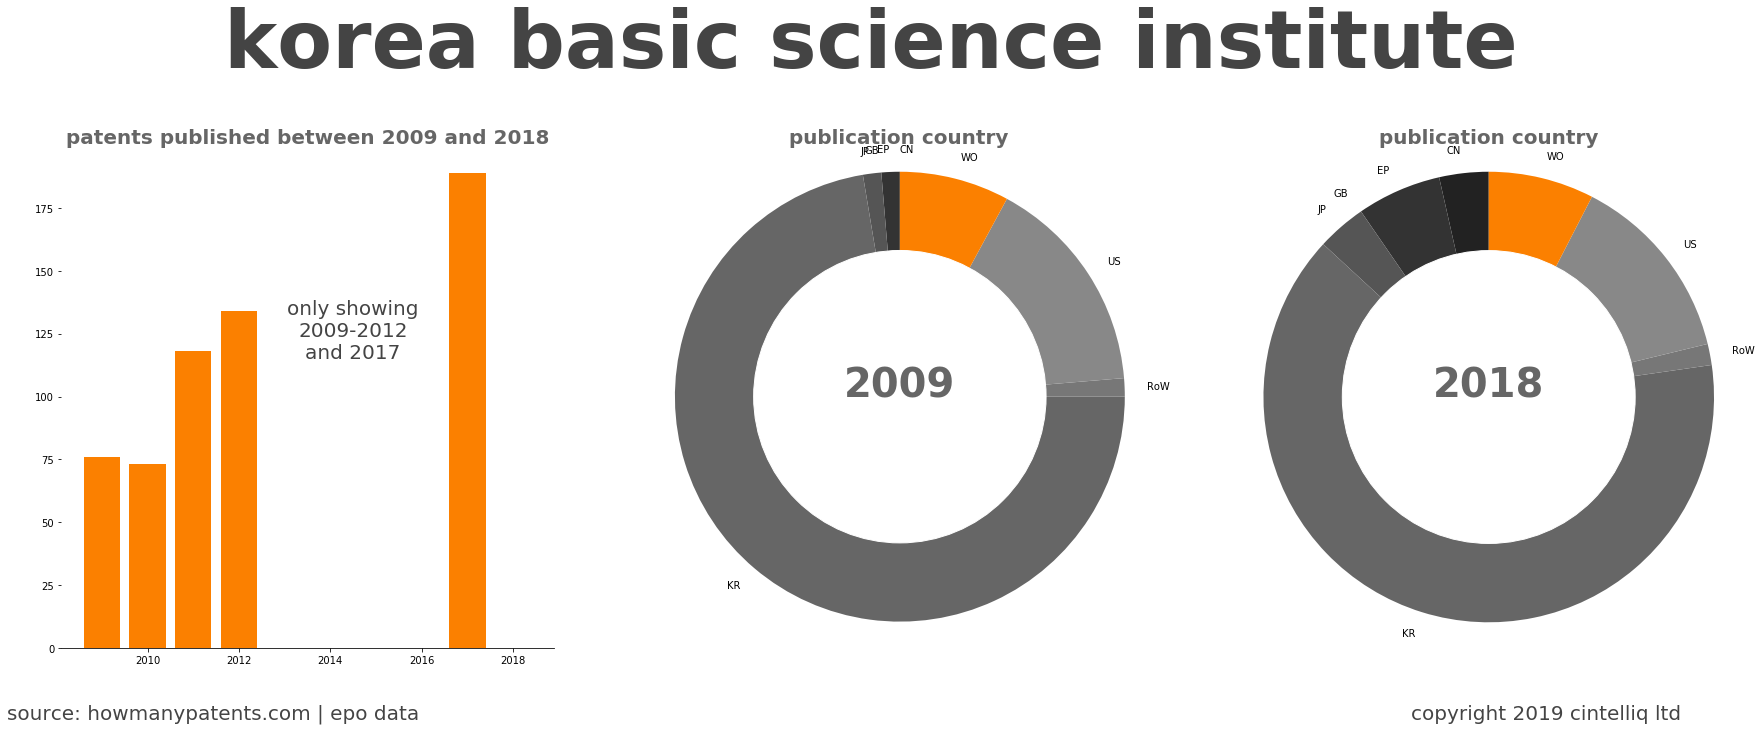 summary of patents for Korea Basic Science Institute